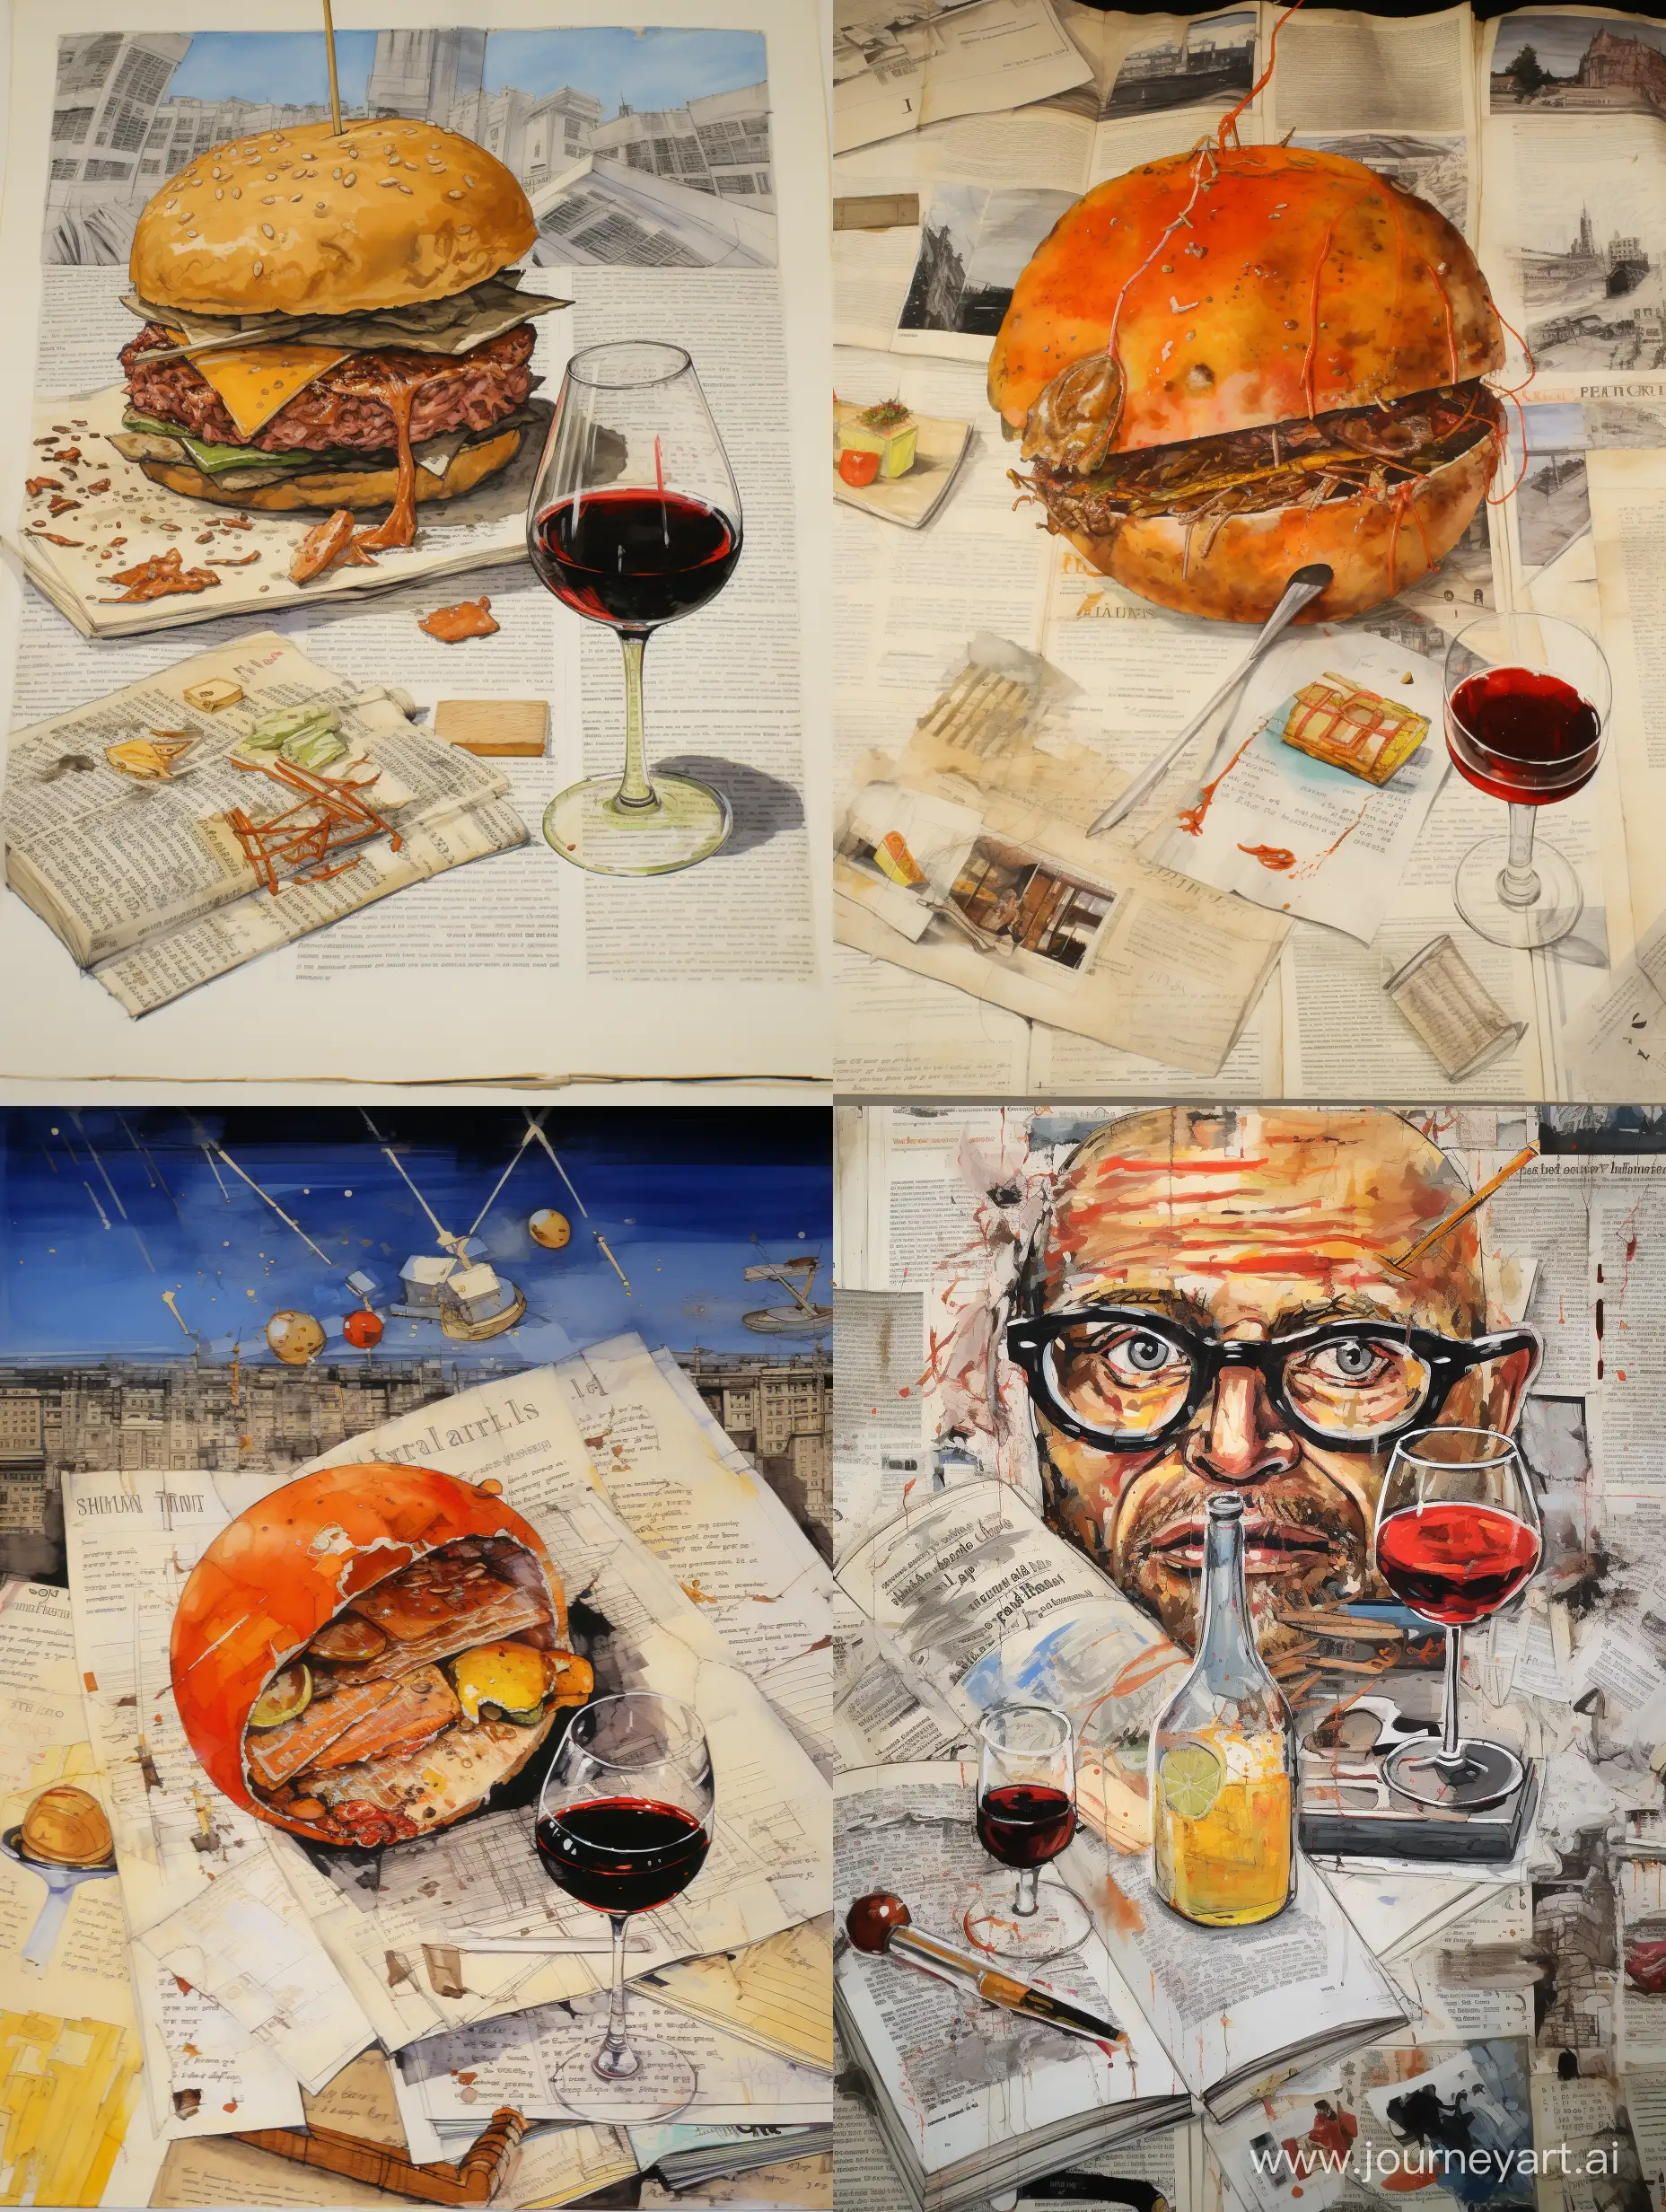 Savory-Burger-and-Fries-Spread-with-Bourbon-in-Ralph-Steadman-Style